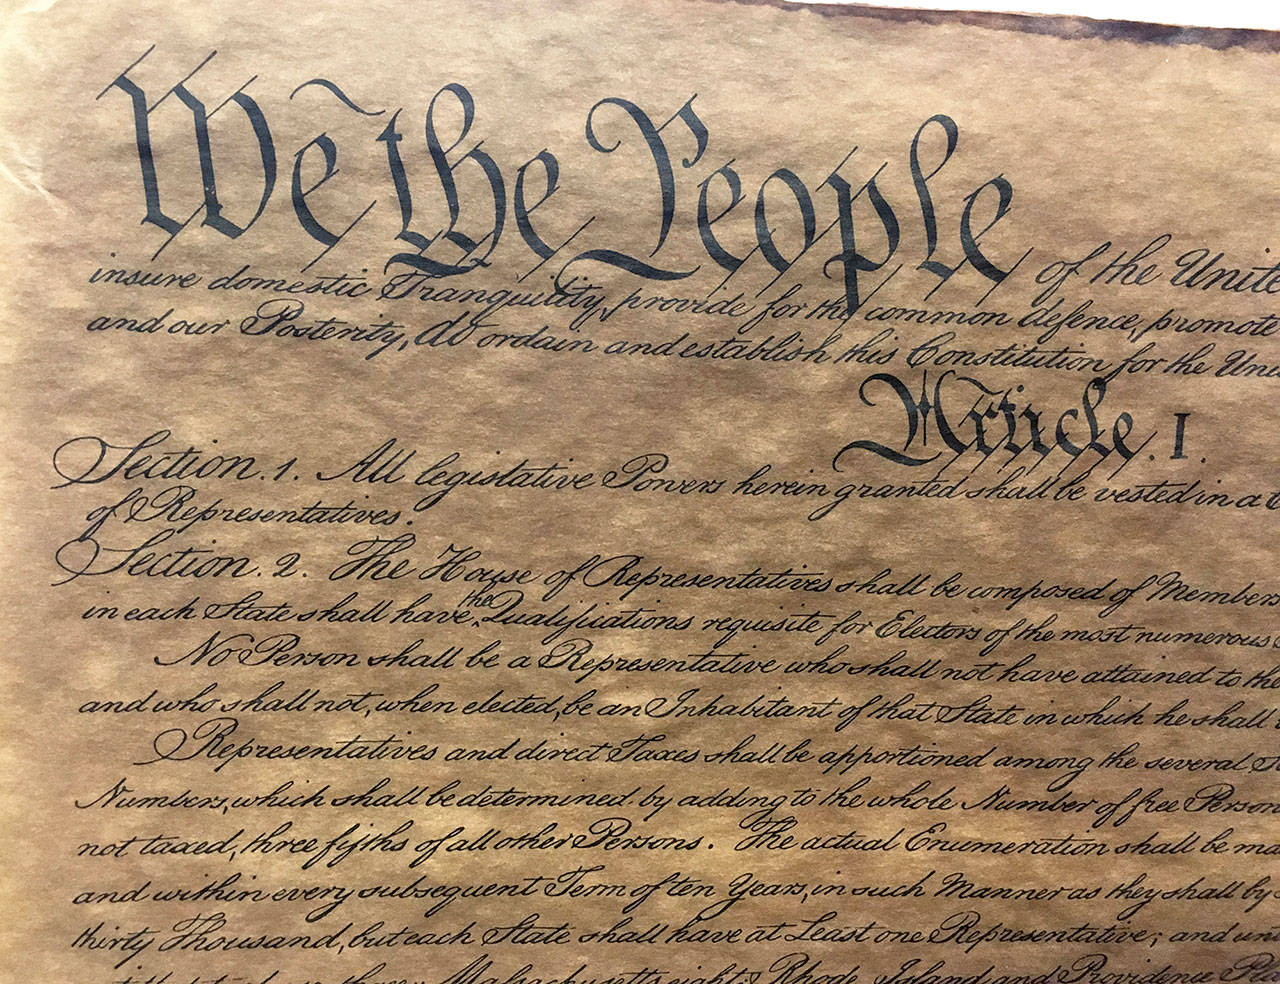 A replica of the Constitution of the United States.